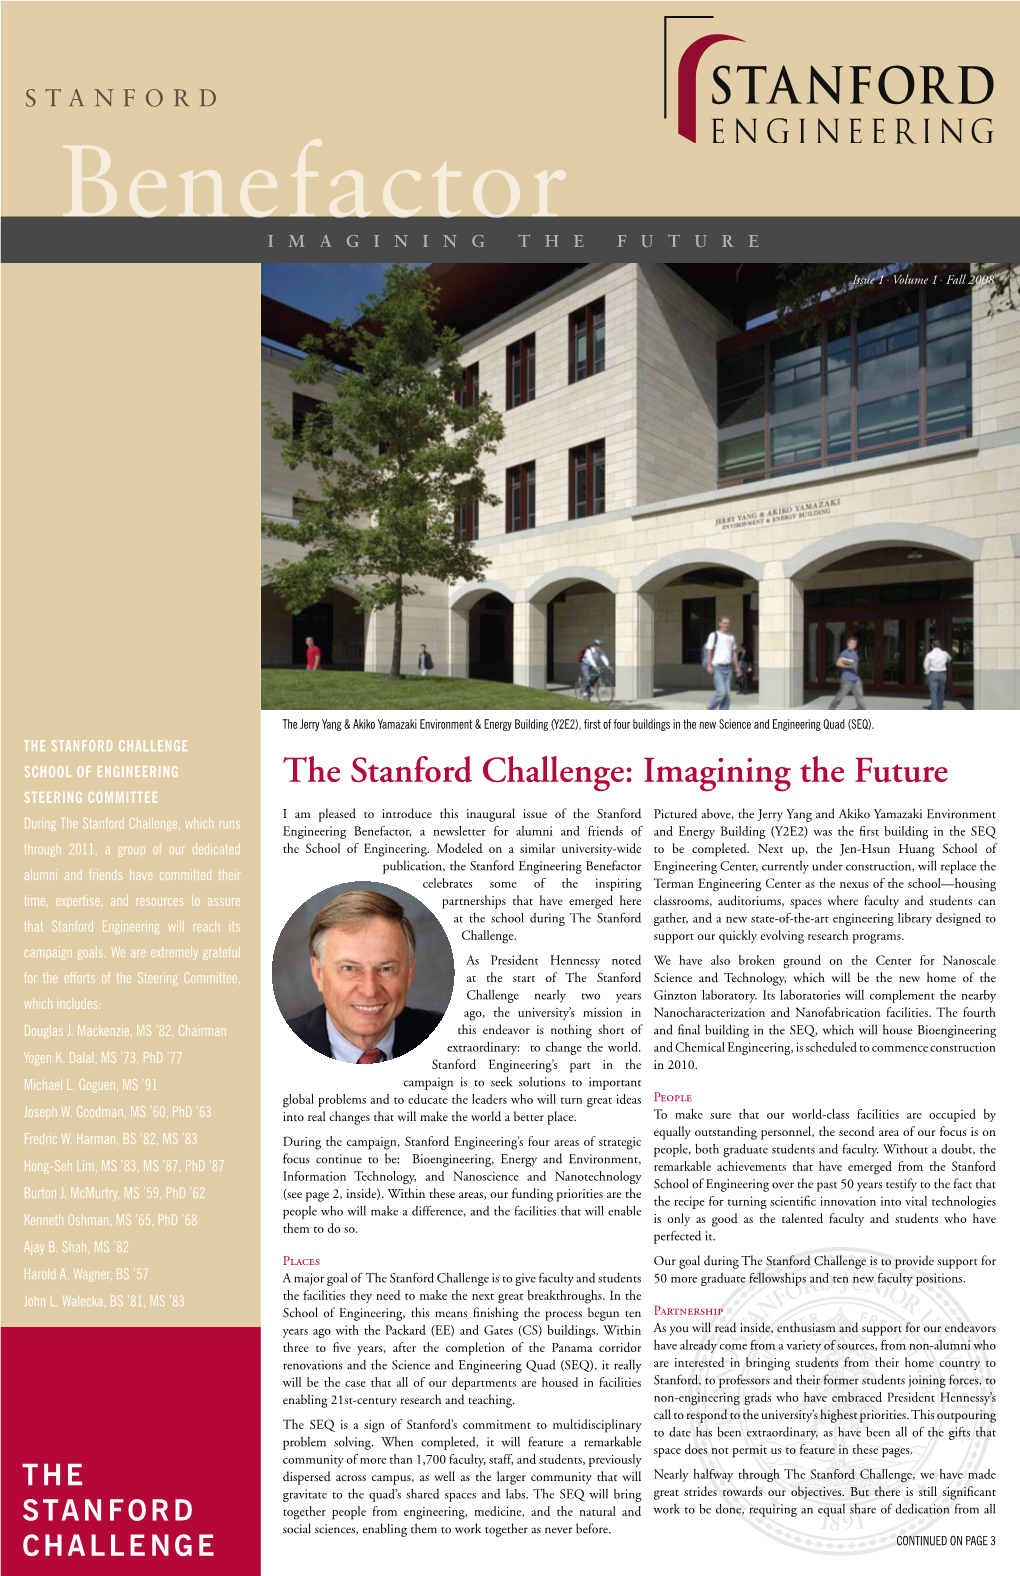 The Stanford Challenge: Imagining the Future